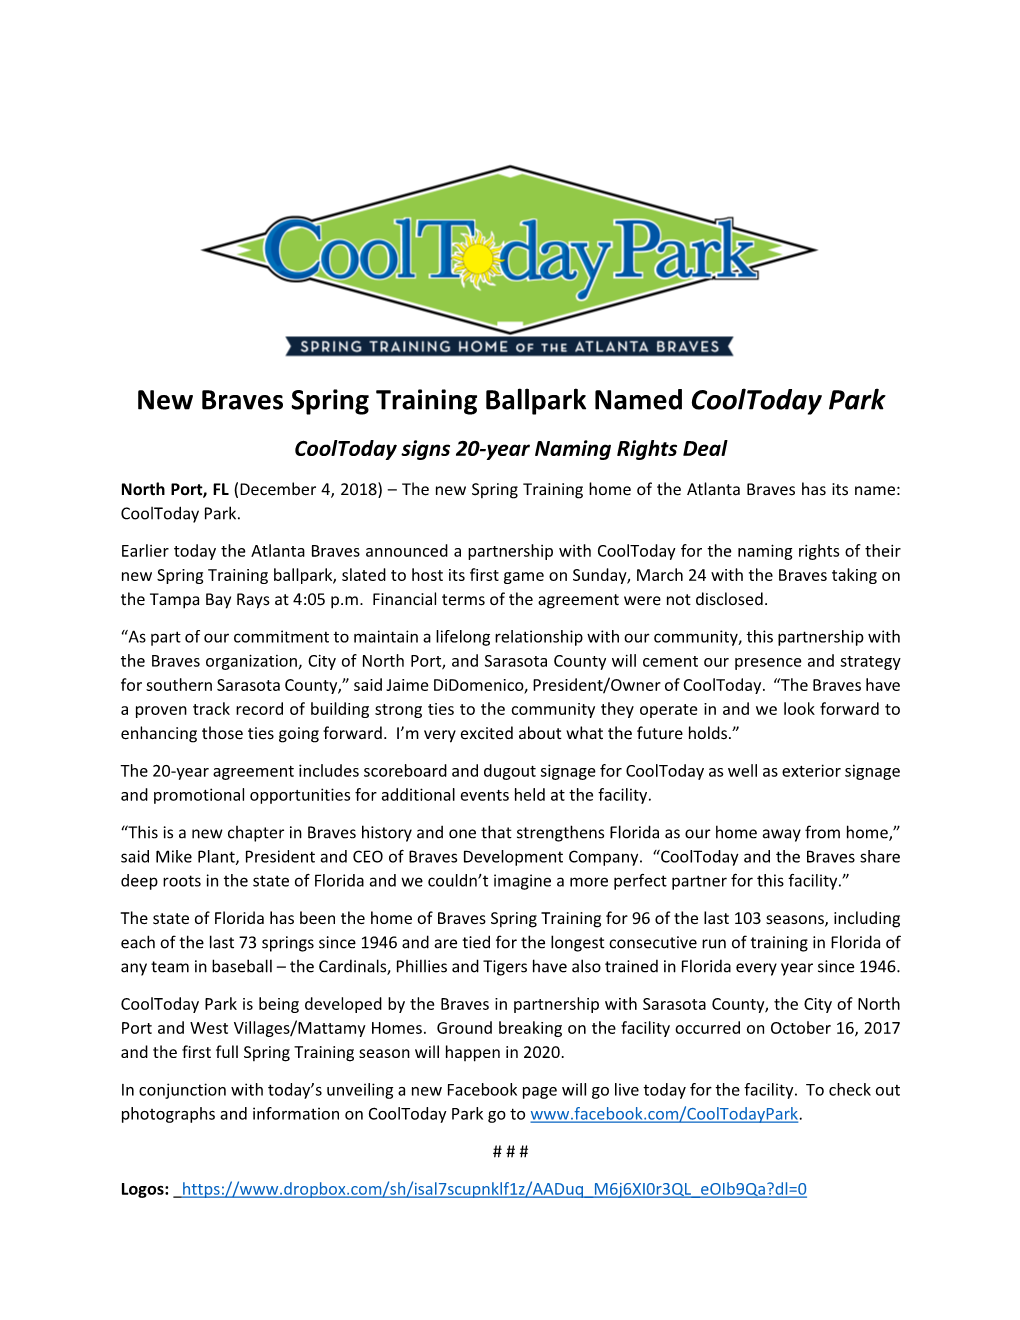 New Braves Spring Training Ballpark Named Cooltoday Park Cooltoday Signs 20-Year Naming Rights Deal